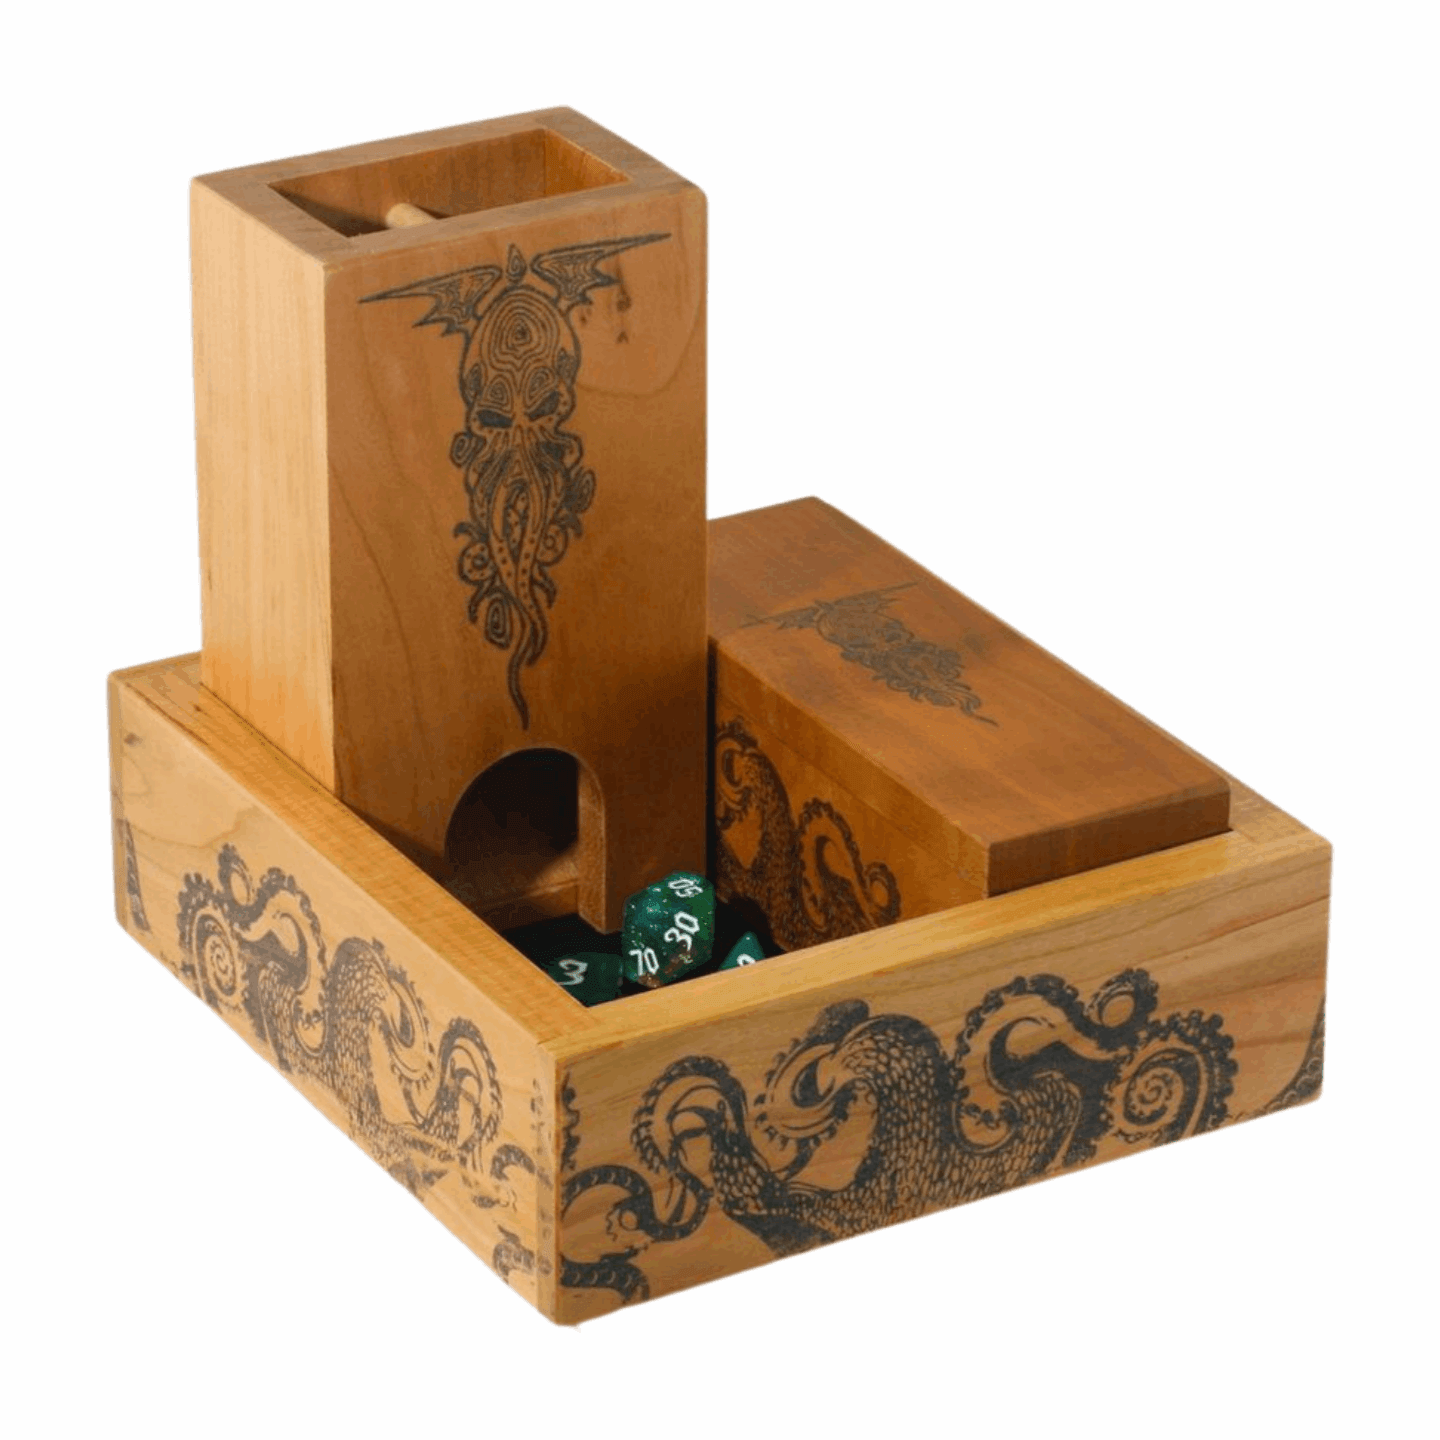 Cthulhu Dice Tower, Dice Vault, and Dice Tray with Tentacle Design Gamer Set